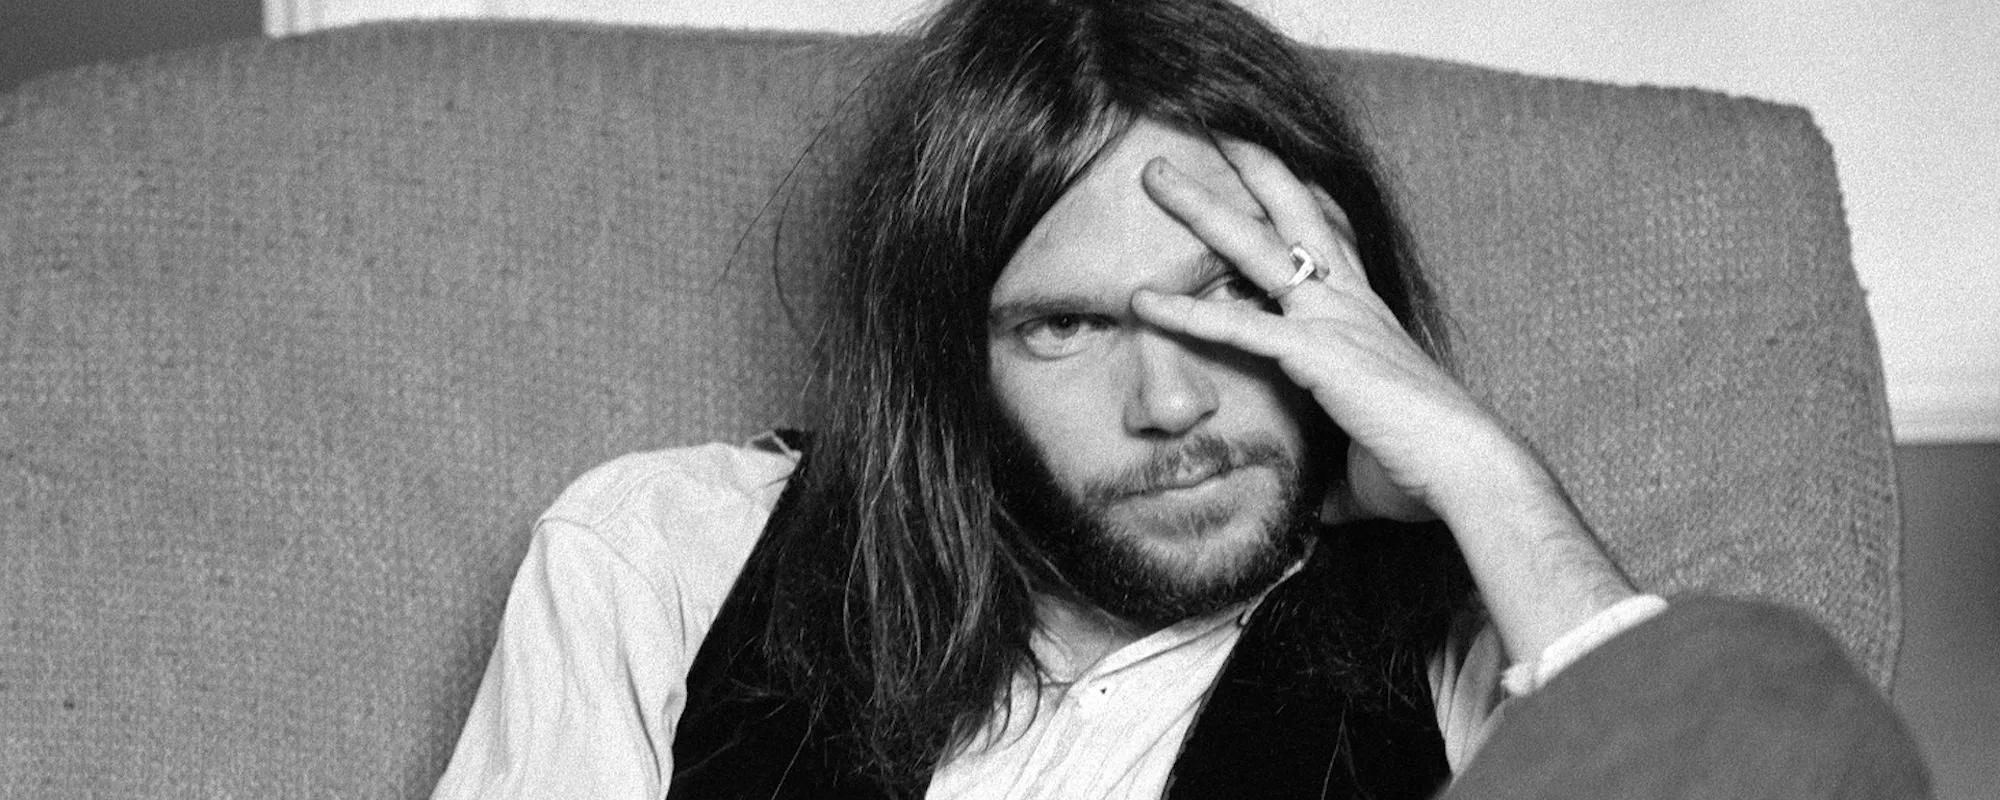 Top 10 Neil Young Covers